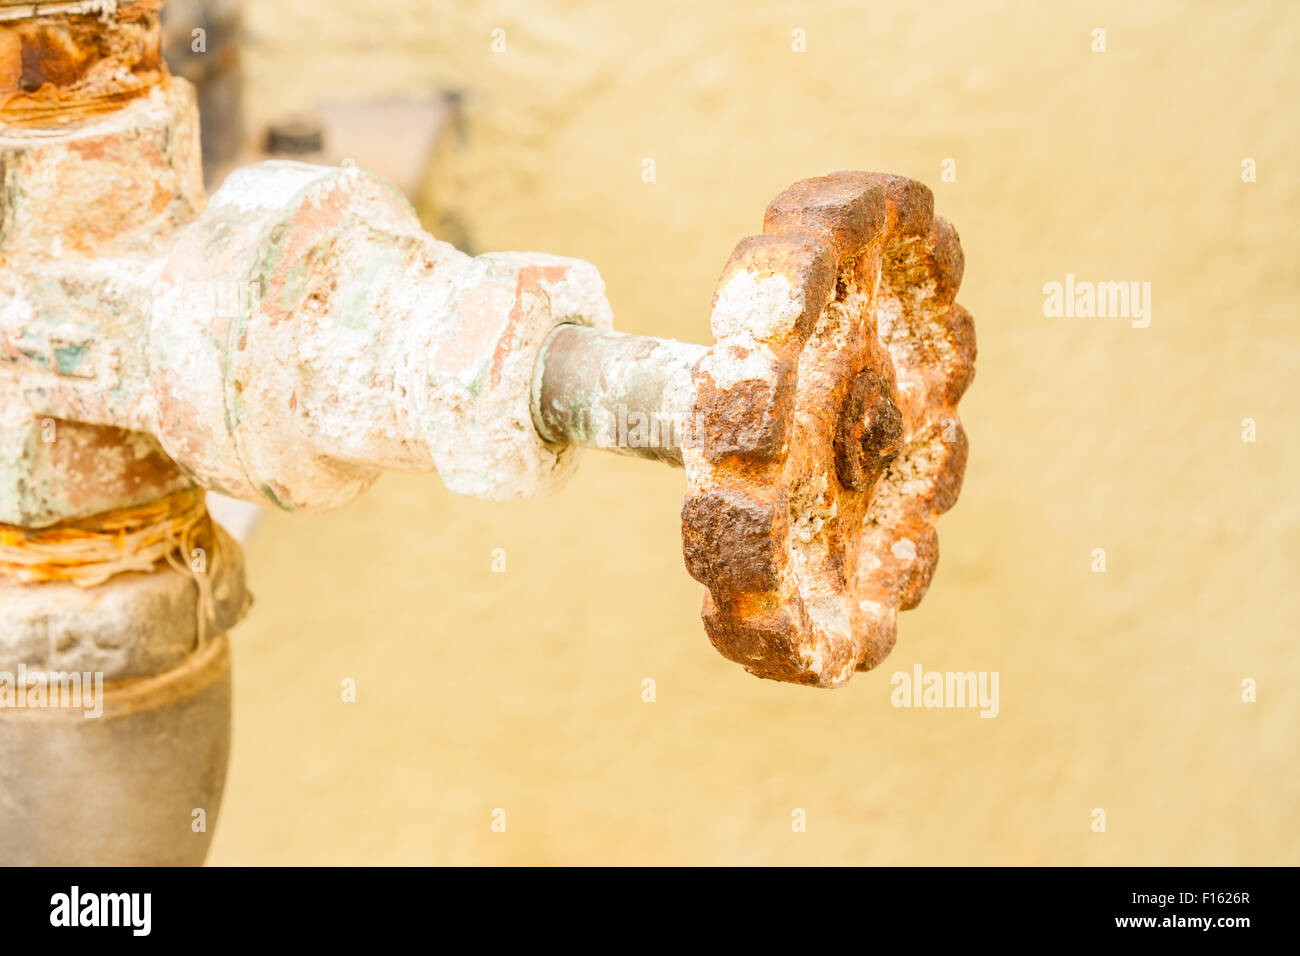 Closeup view of a gate valve that is covered with rust. Stock Photo